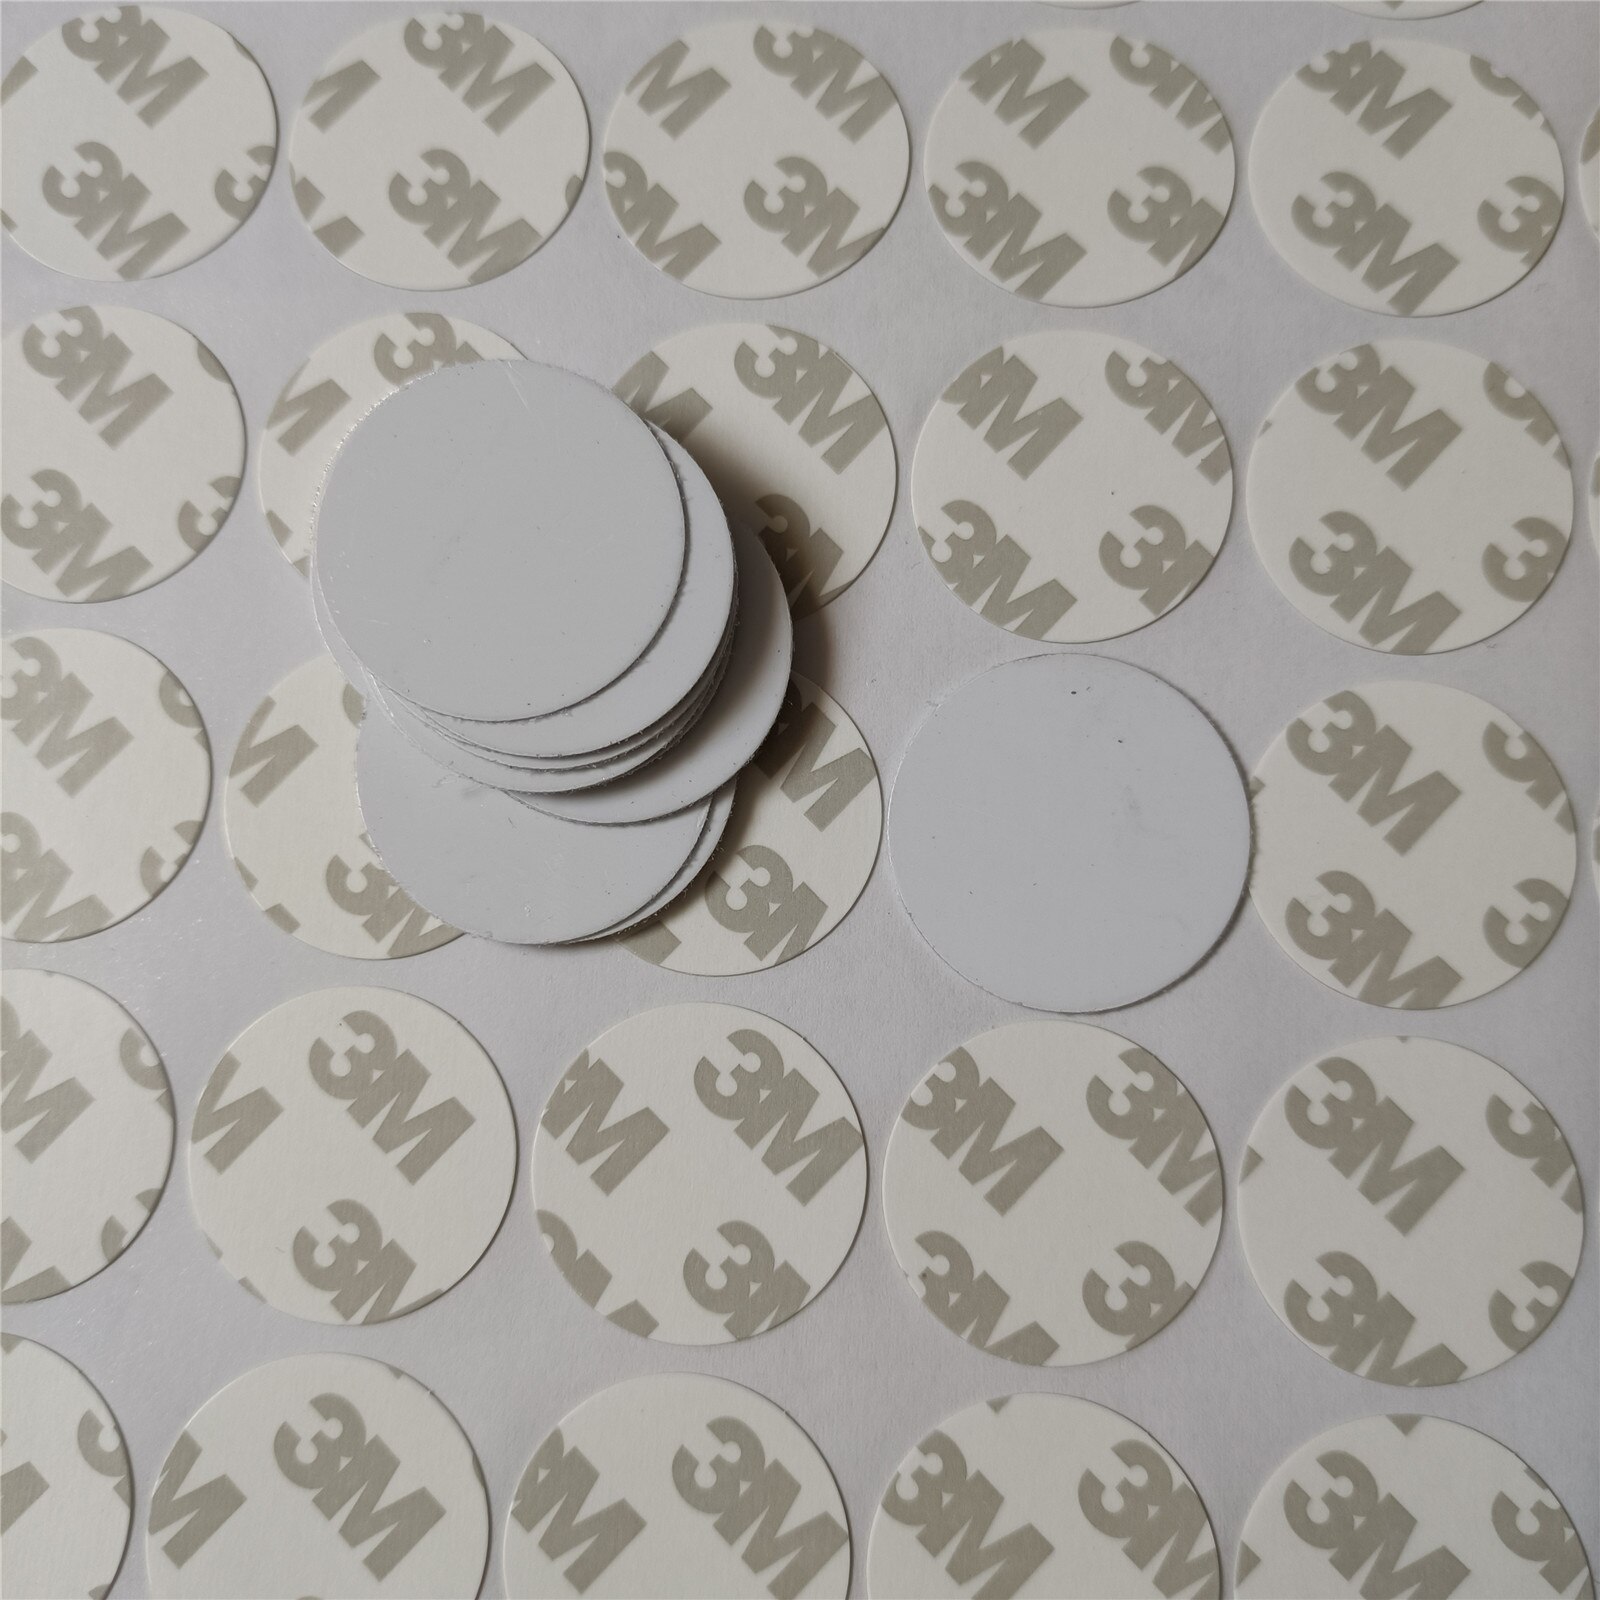 50pcs/lot Blank Sublimable Round Aluminum Patch 16mm 18mm 20mm 25mm 30mm 38mm Diameter 1.6cm 1.8cm 2cm 2.5cm 3cm 3.8cm: 30mm Patch and Tape